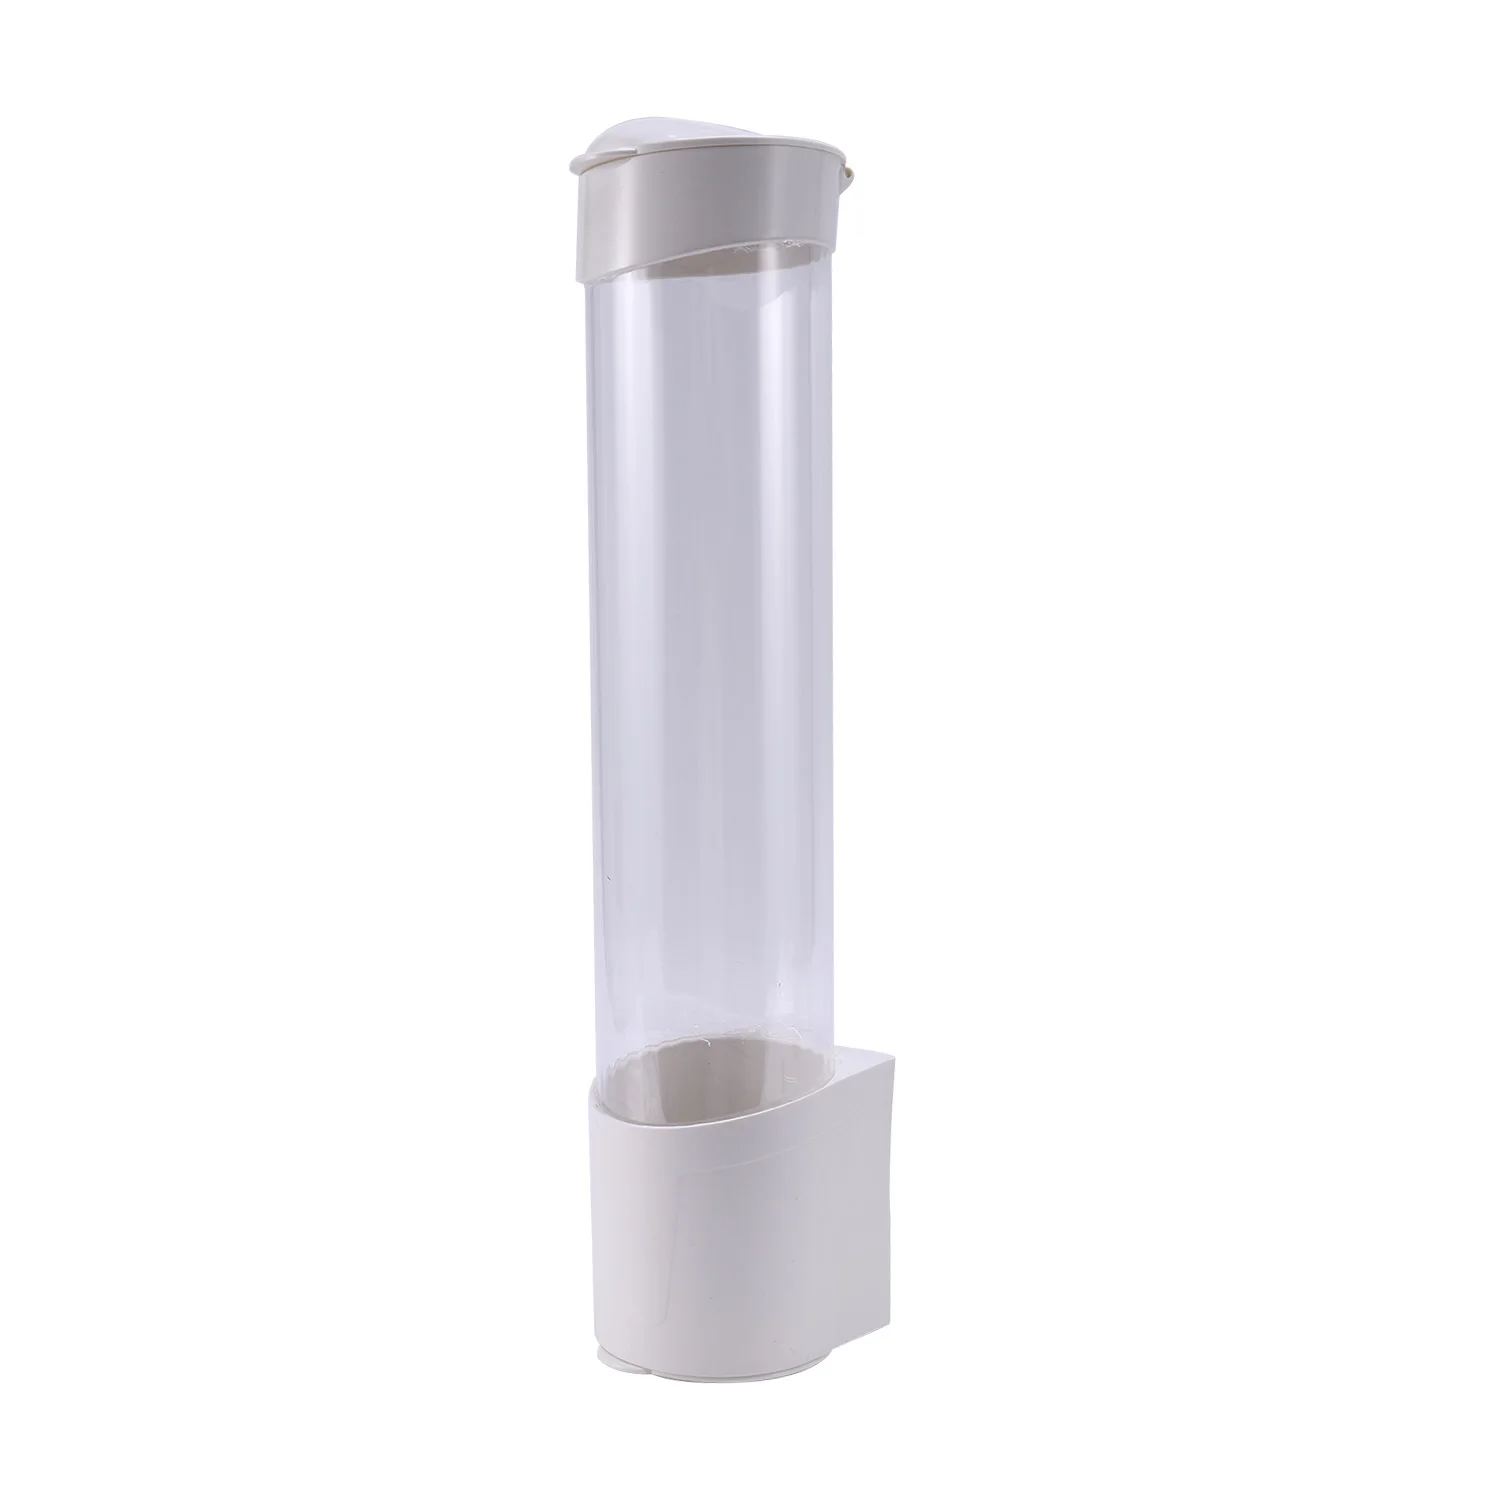 

Dispenser Automatically Drop Cup Remover Disposable Cup Plastic Cup Paper Cup Dust Storage Rack